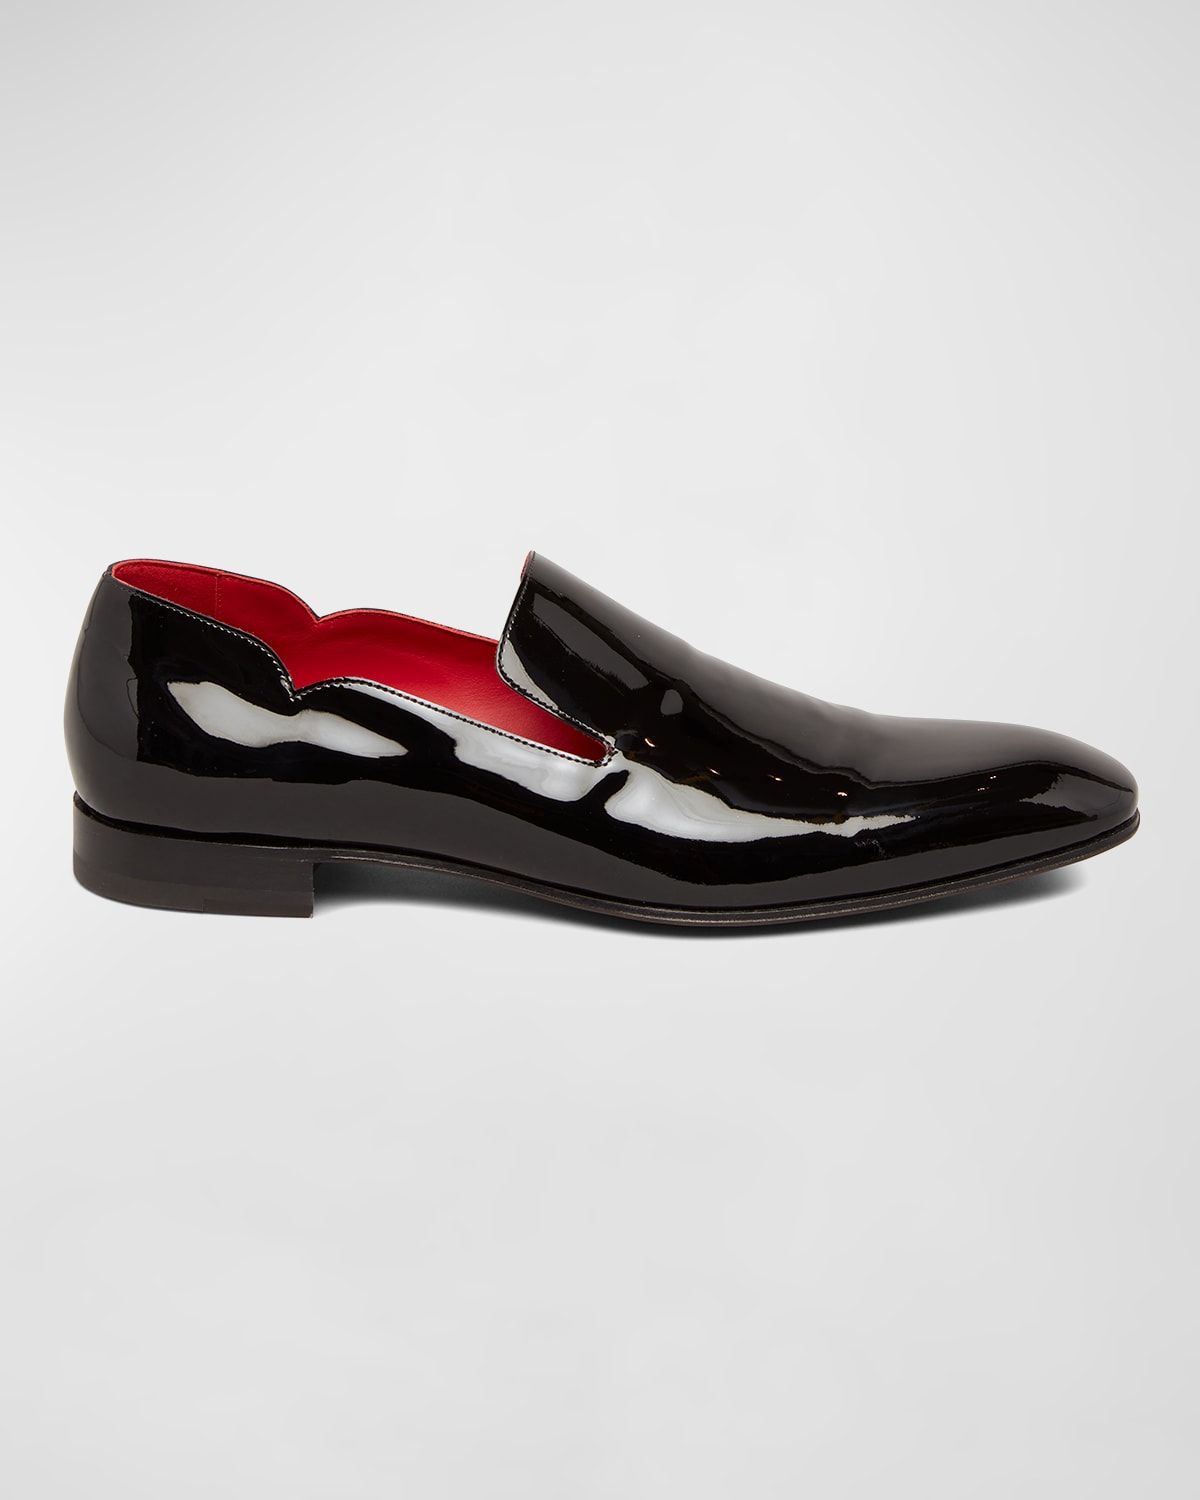 Men's Dandy Chick Flat Patent Leather Loafers